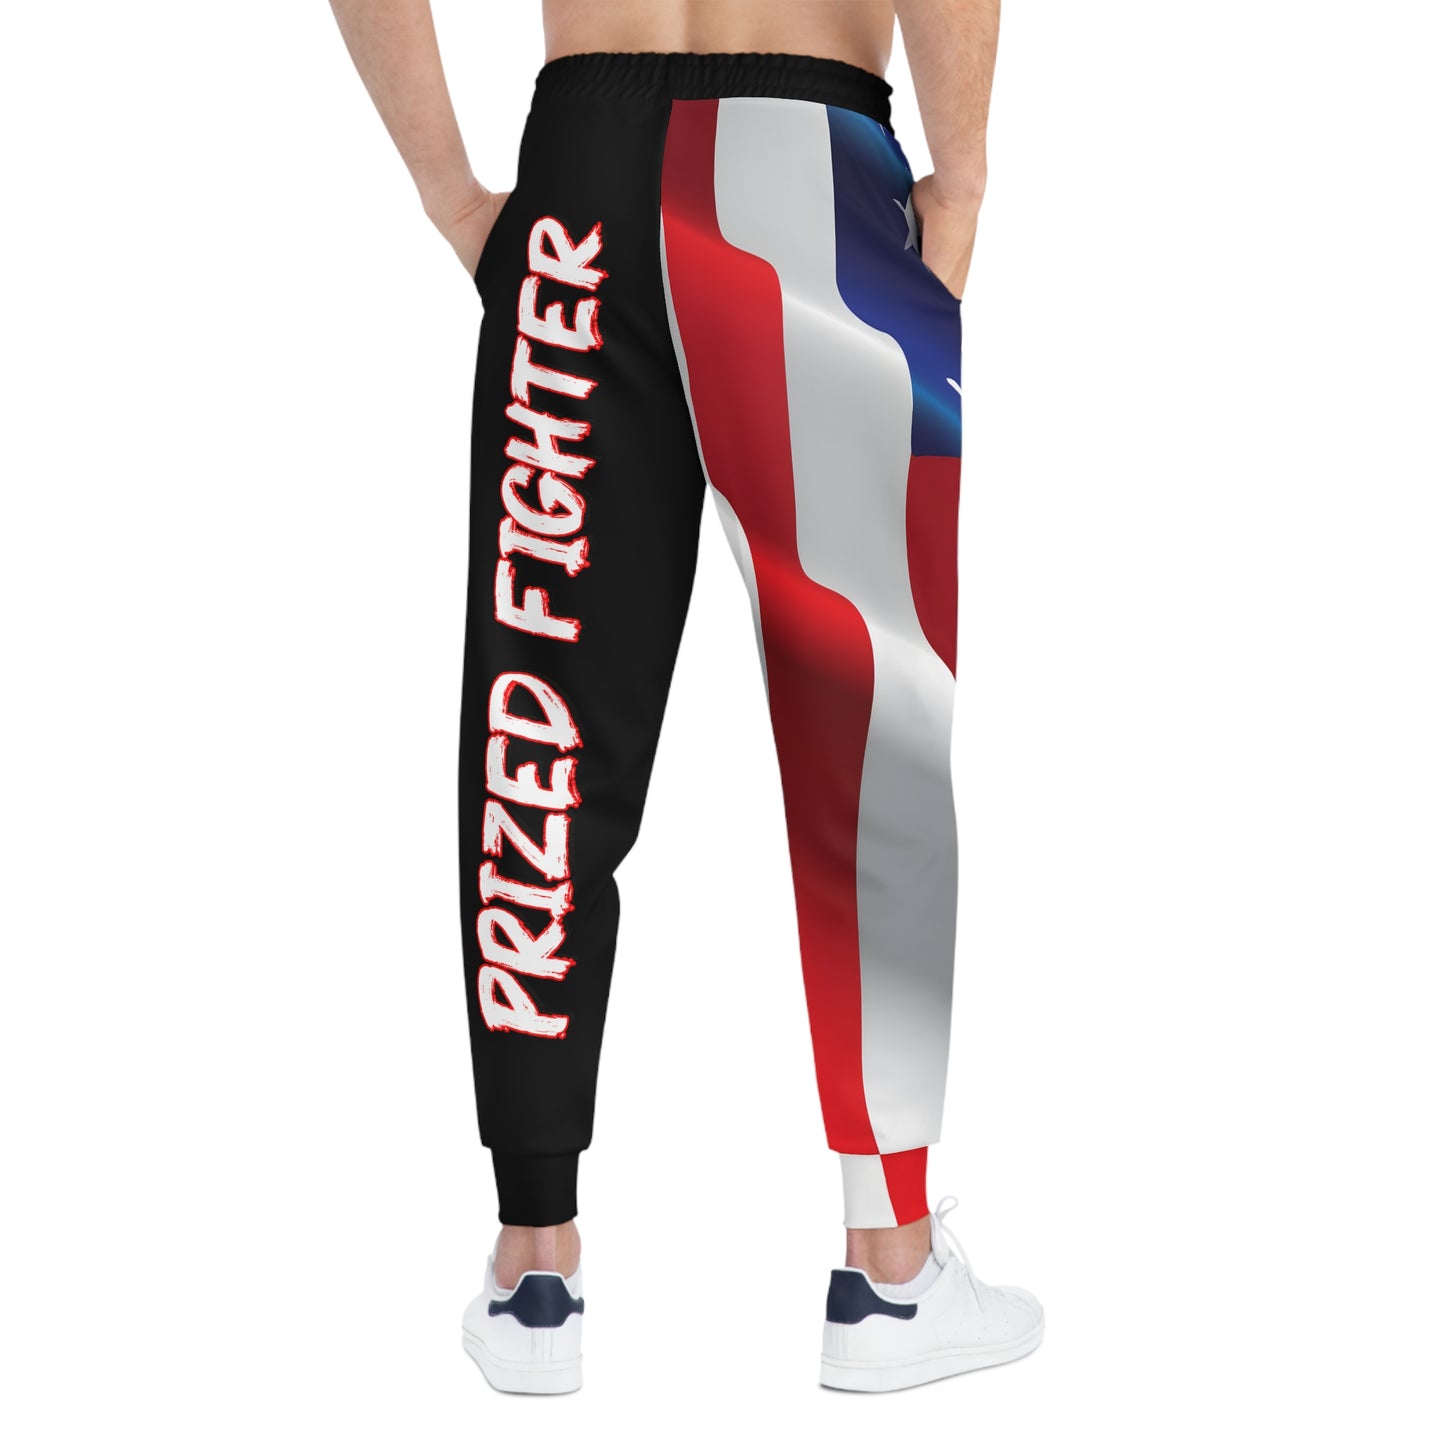 Kǎtōng Piàn - Prized Fighter Collection - America - 004 - Athletic Joggers